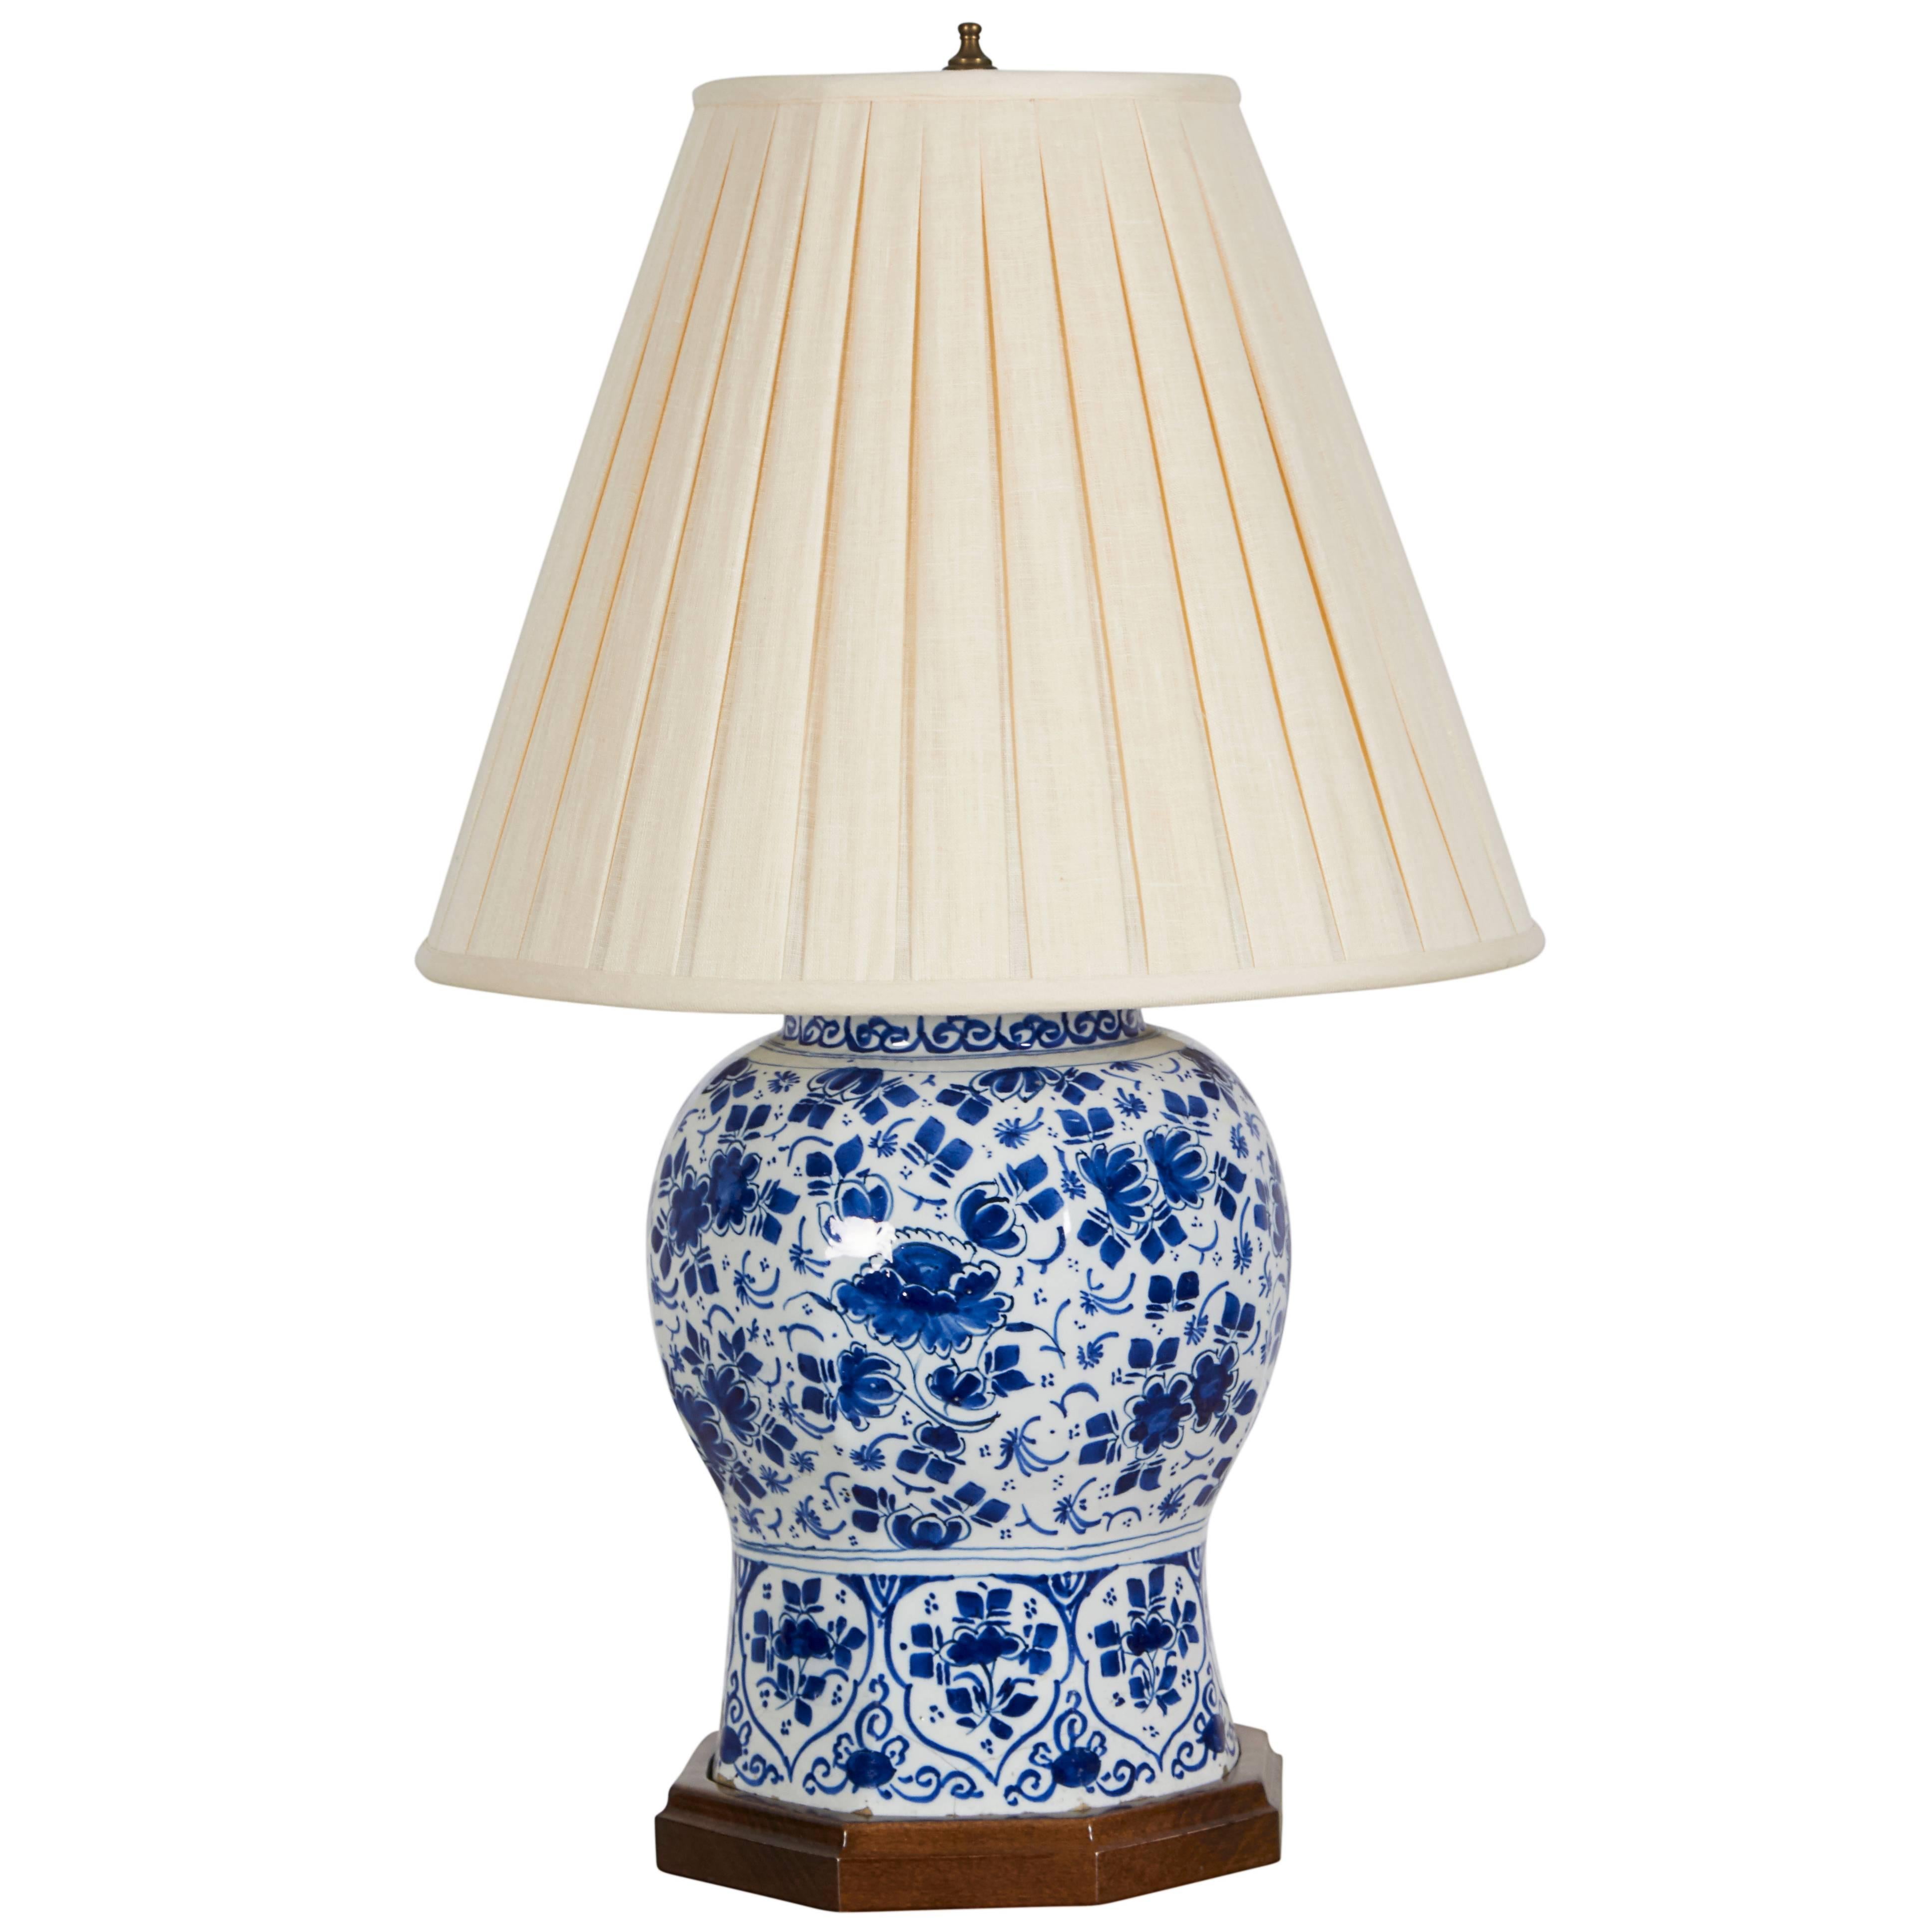 18th Century Delft Blue and White Vase Mounted as a Lamp